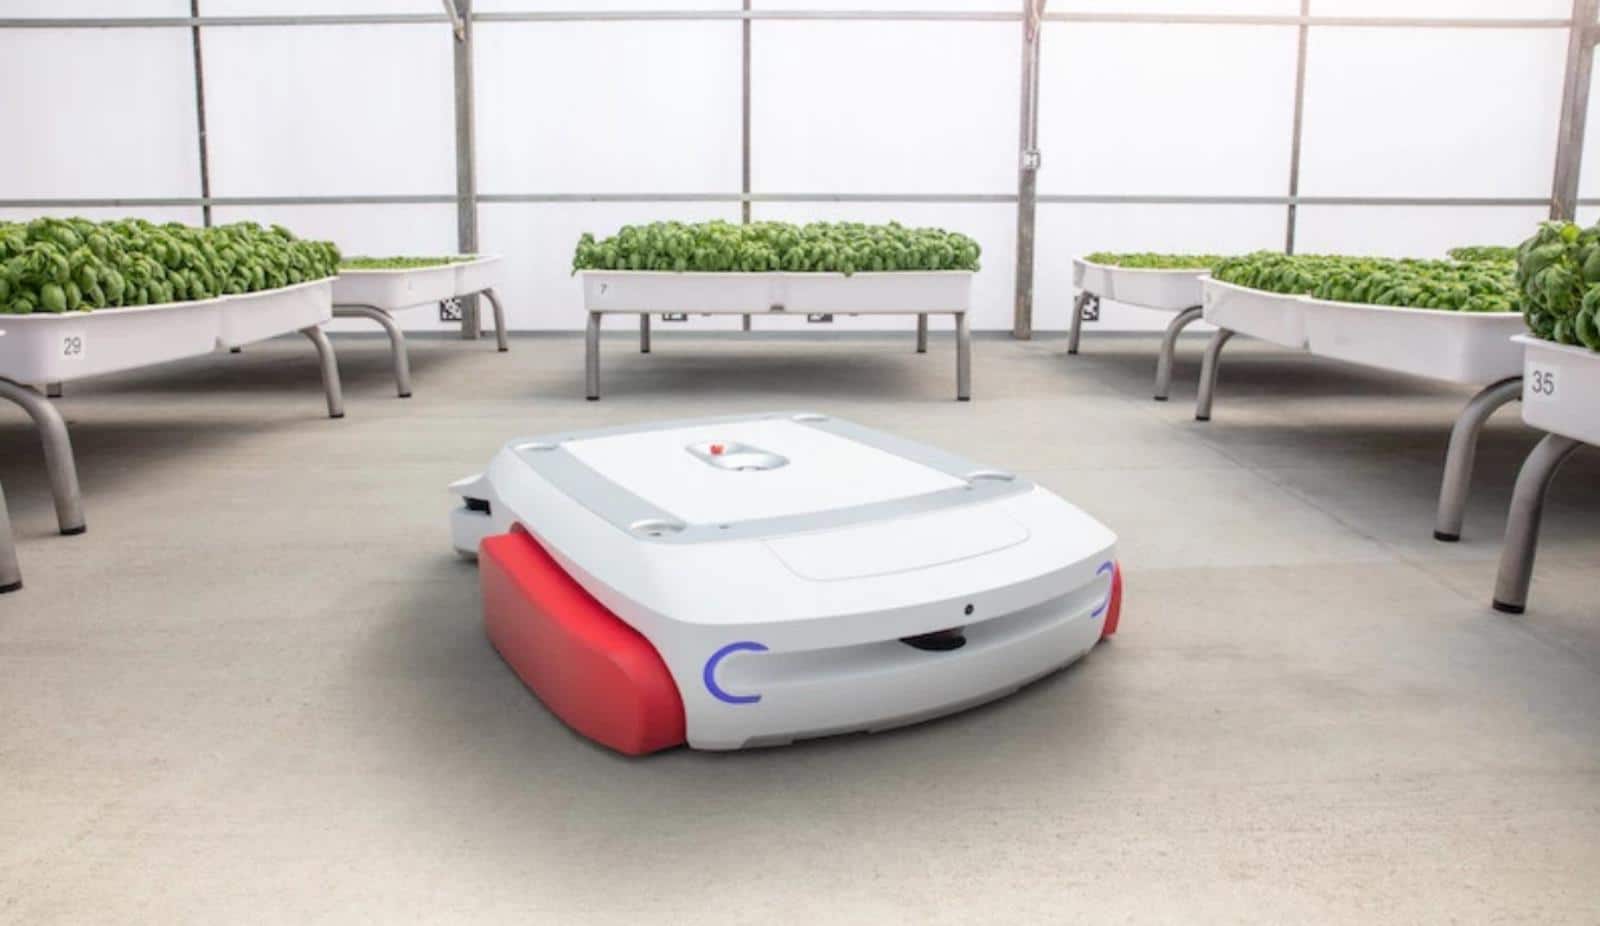 The Grover Robot looks like a giant robotic vacuum cleaner, but it's made for modern greenhouses